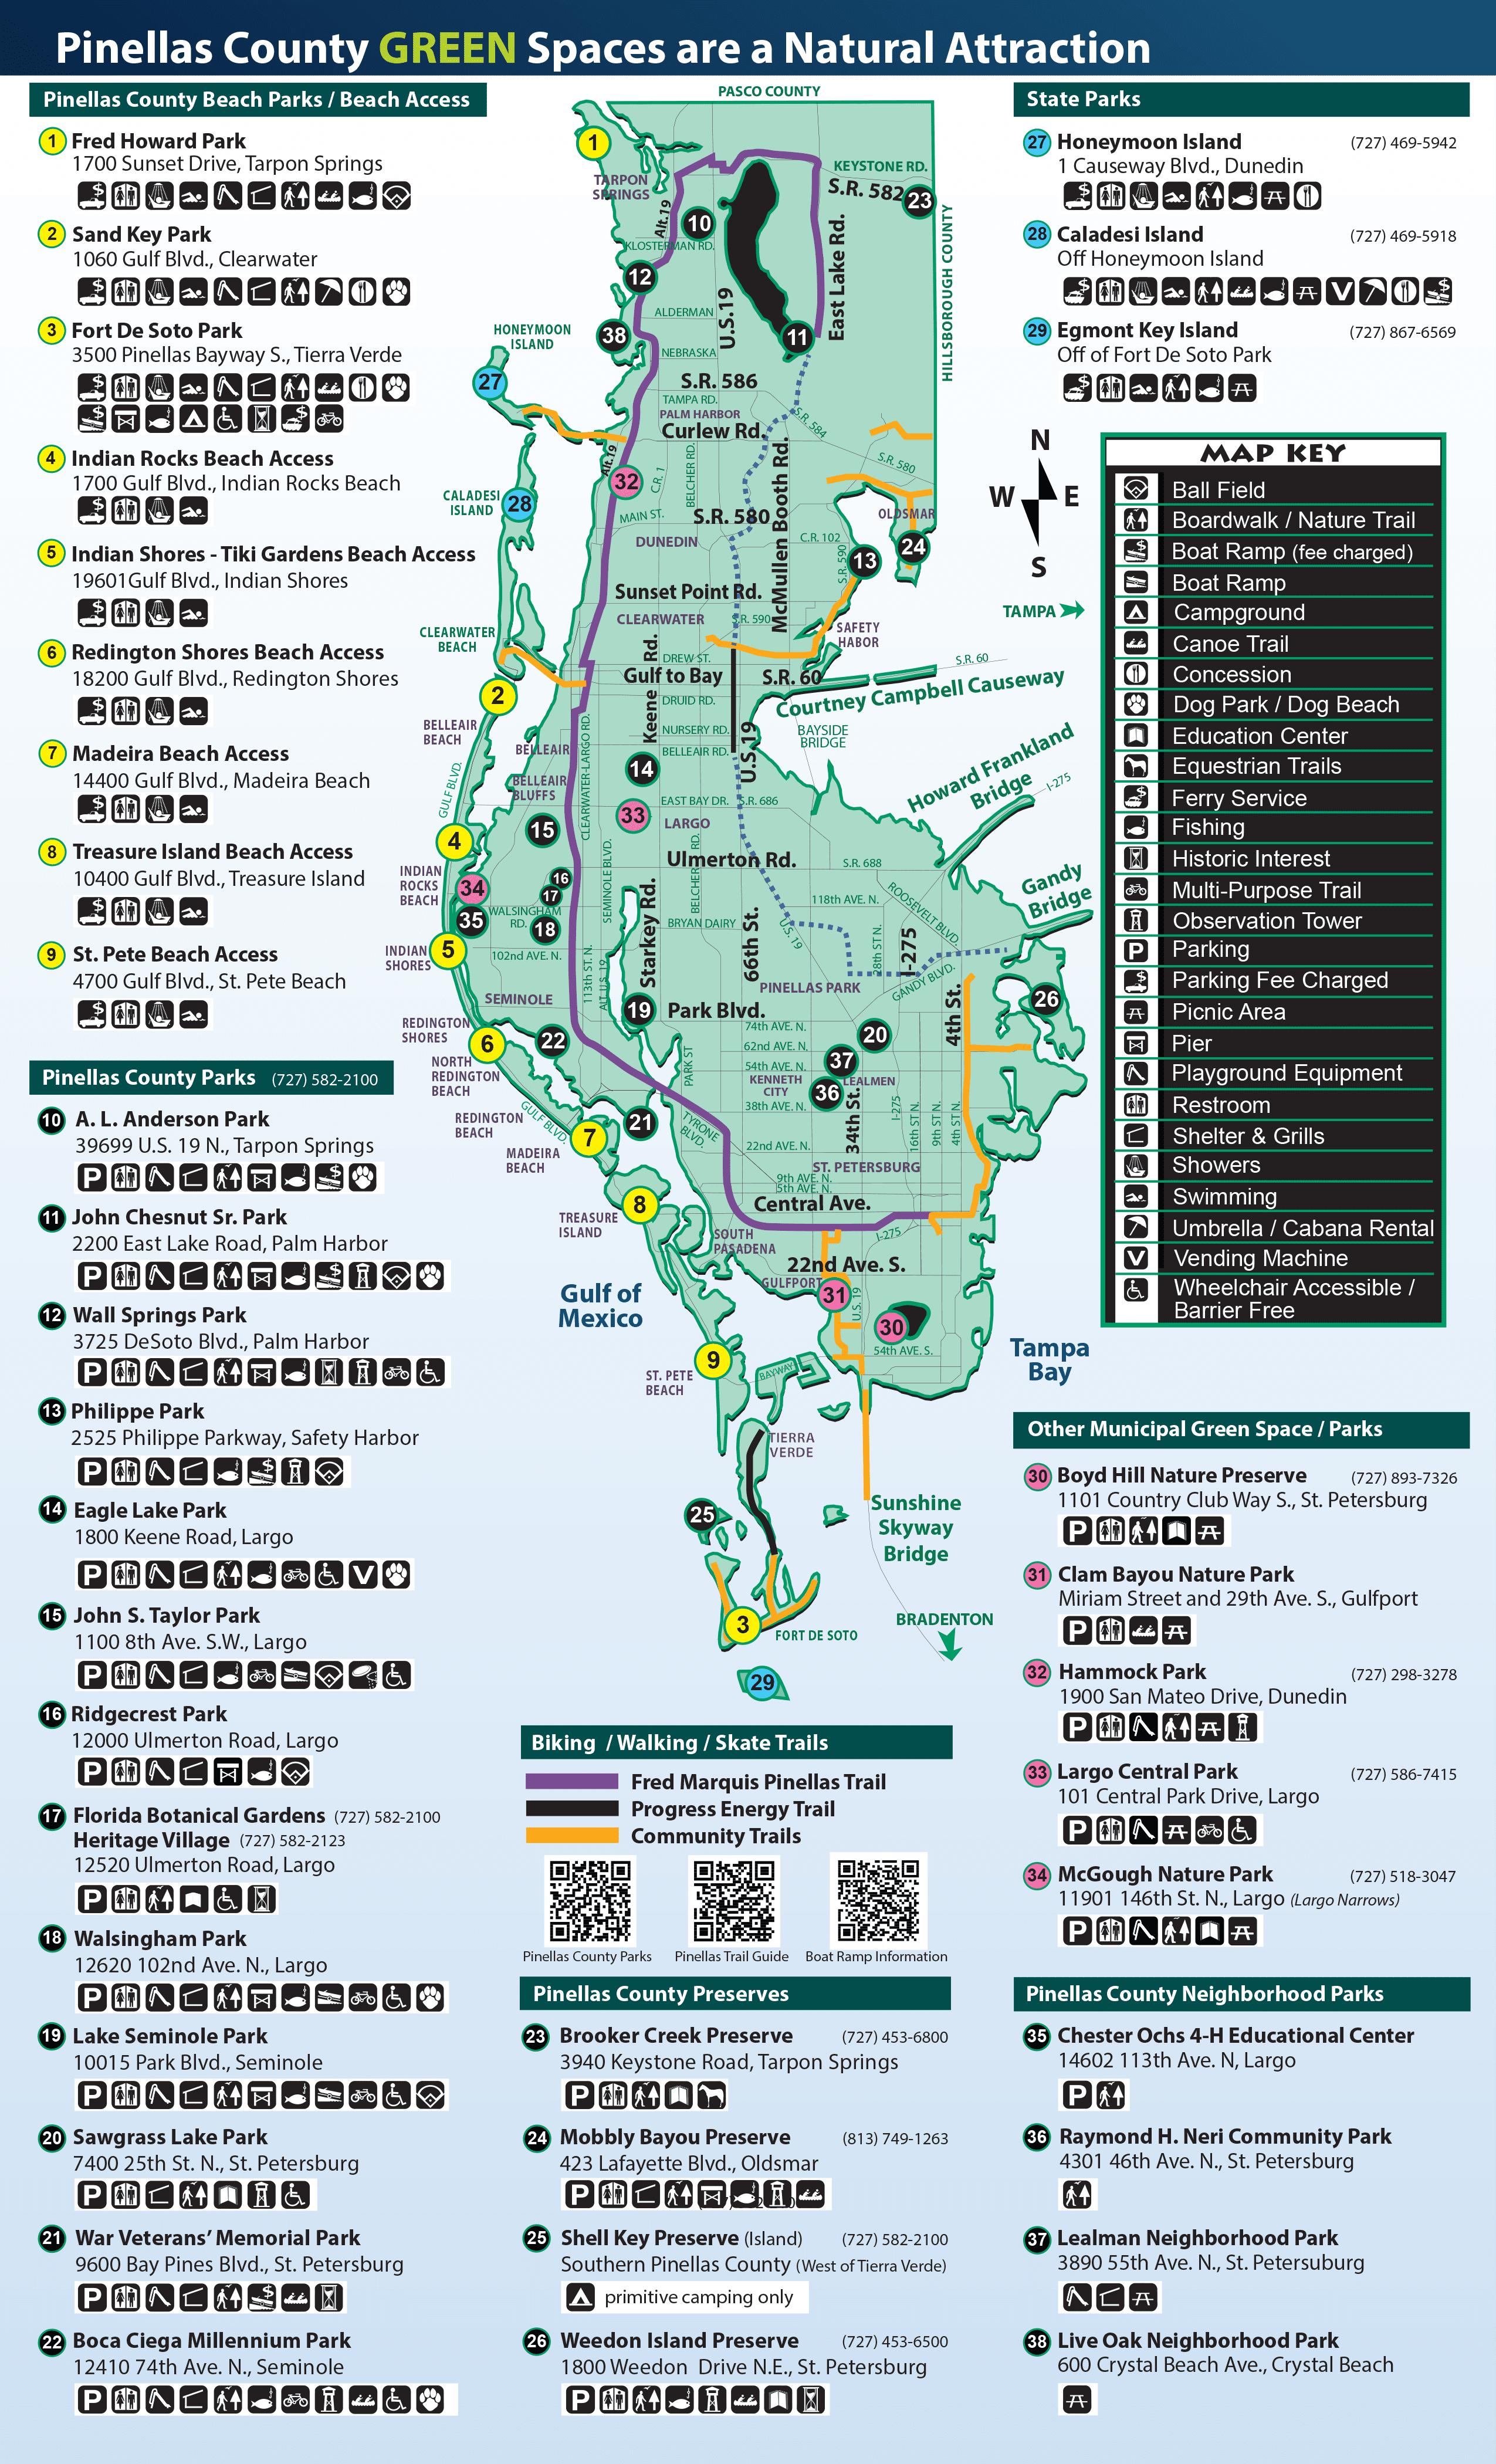 Pinellas Green Spaces Map